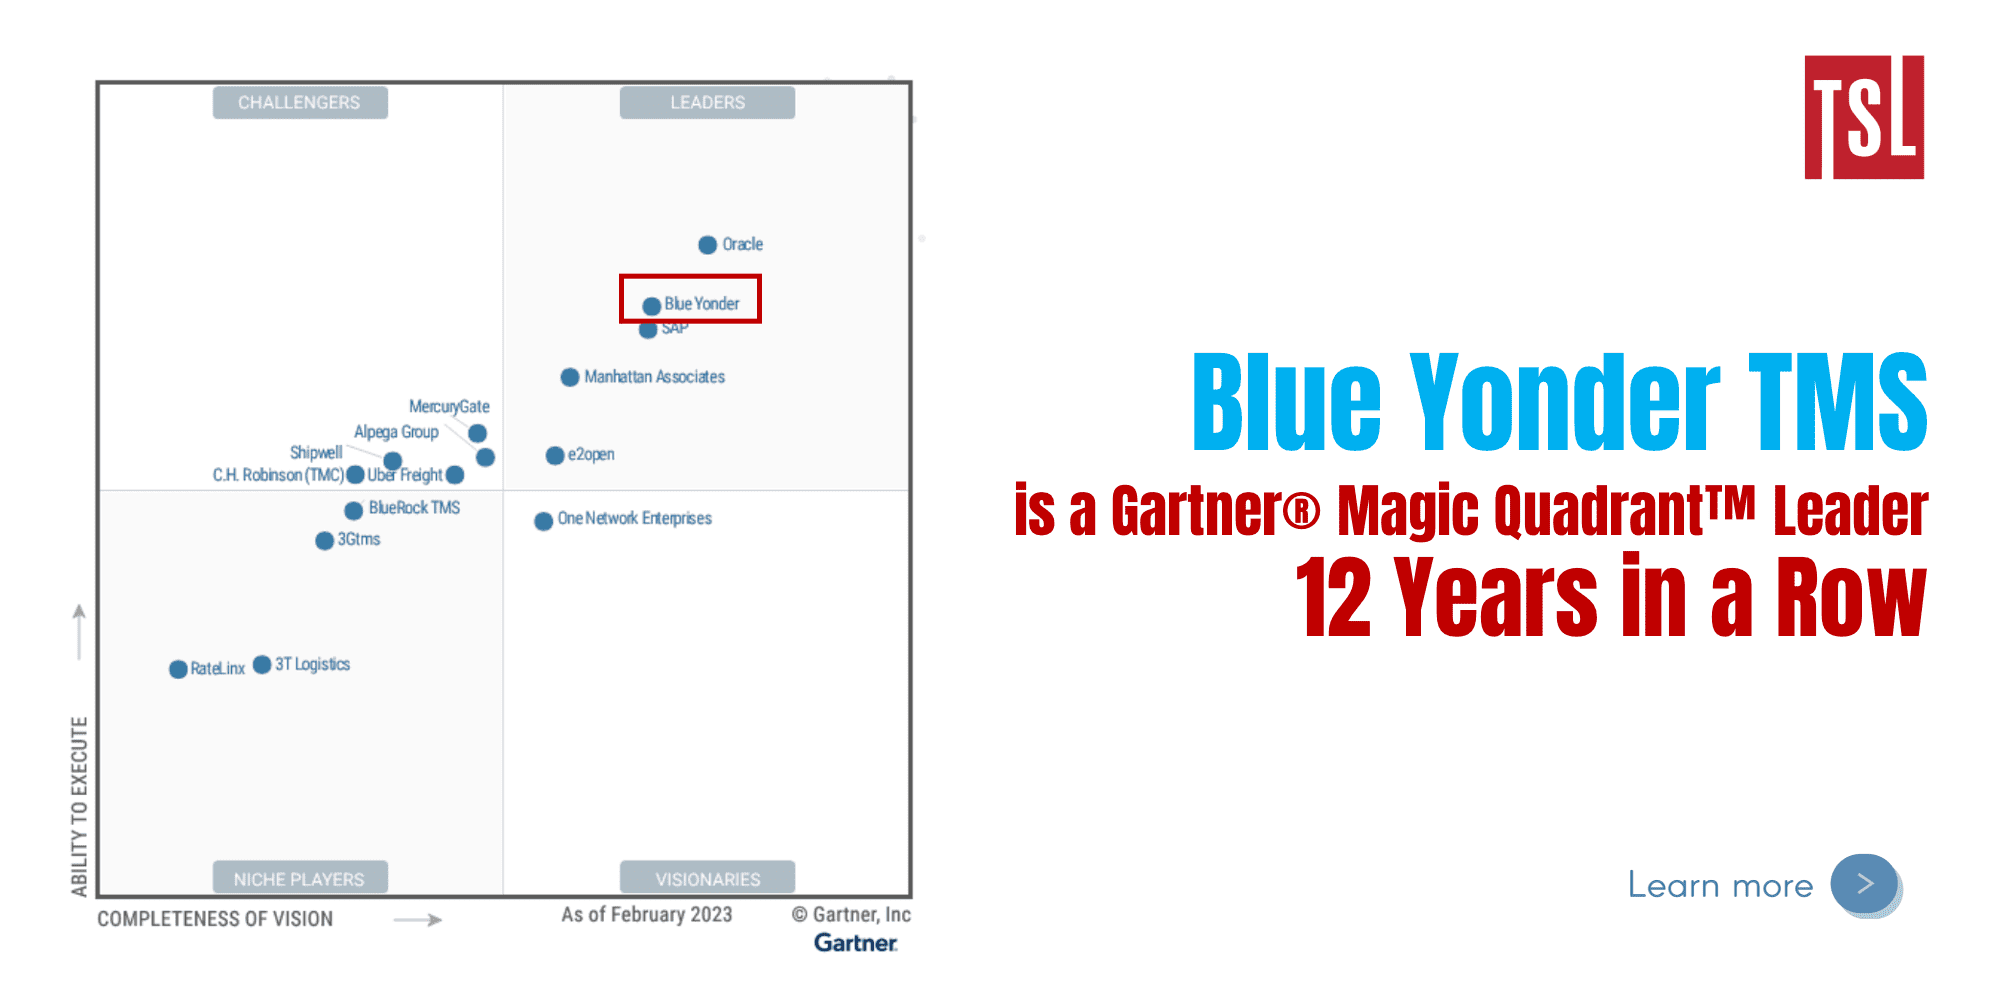 Blue Yonder TMS is a Gartner® Magic Quadrant™ Leader 12 Years in a Row